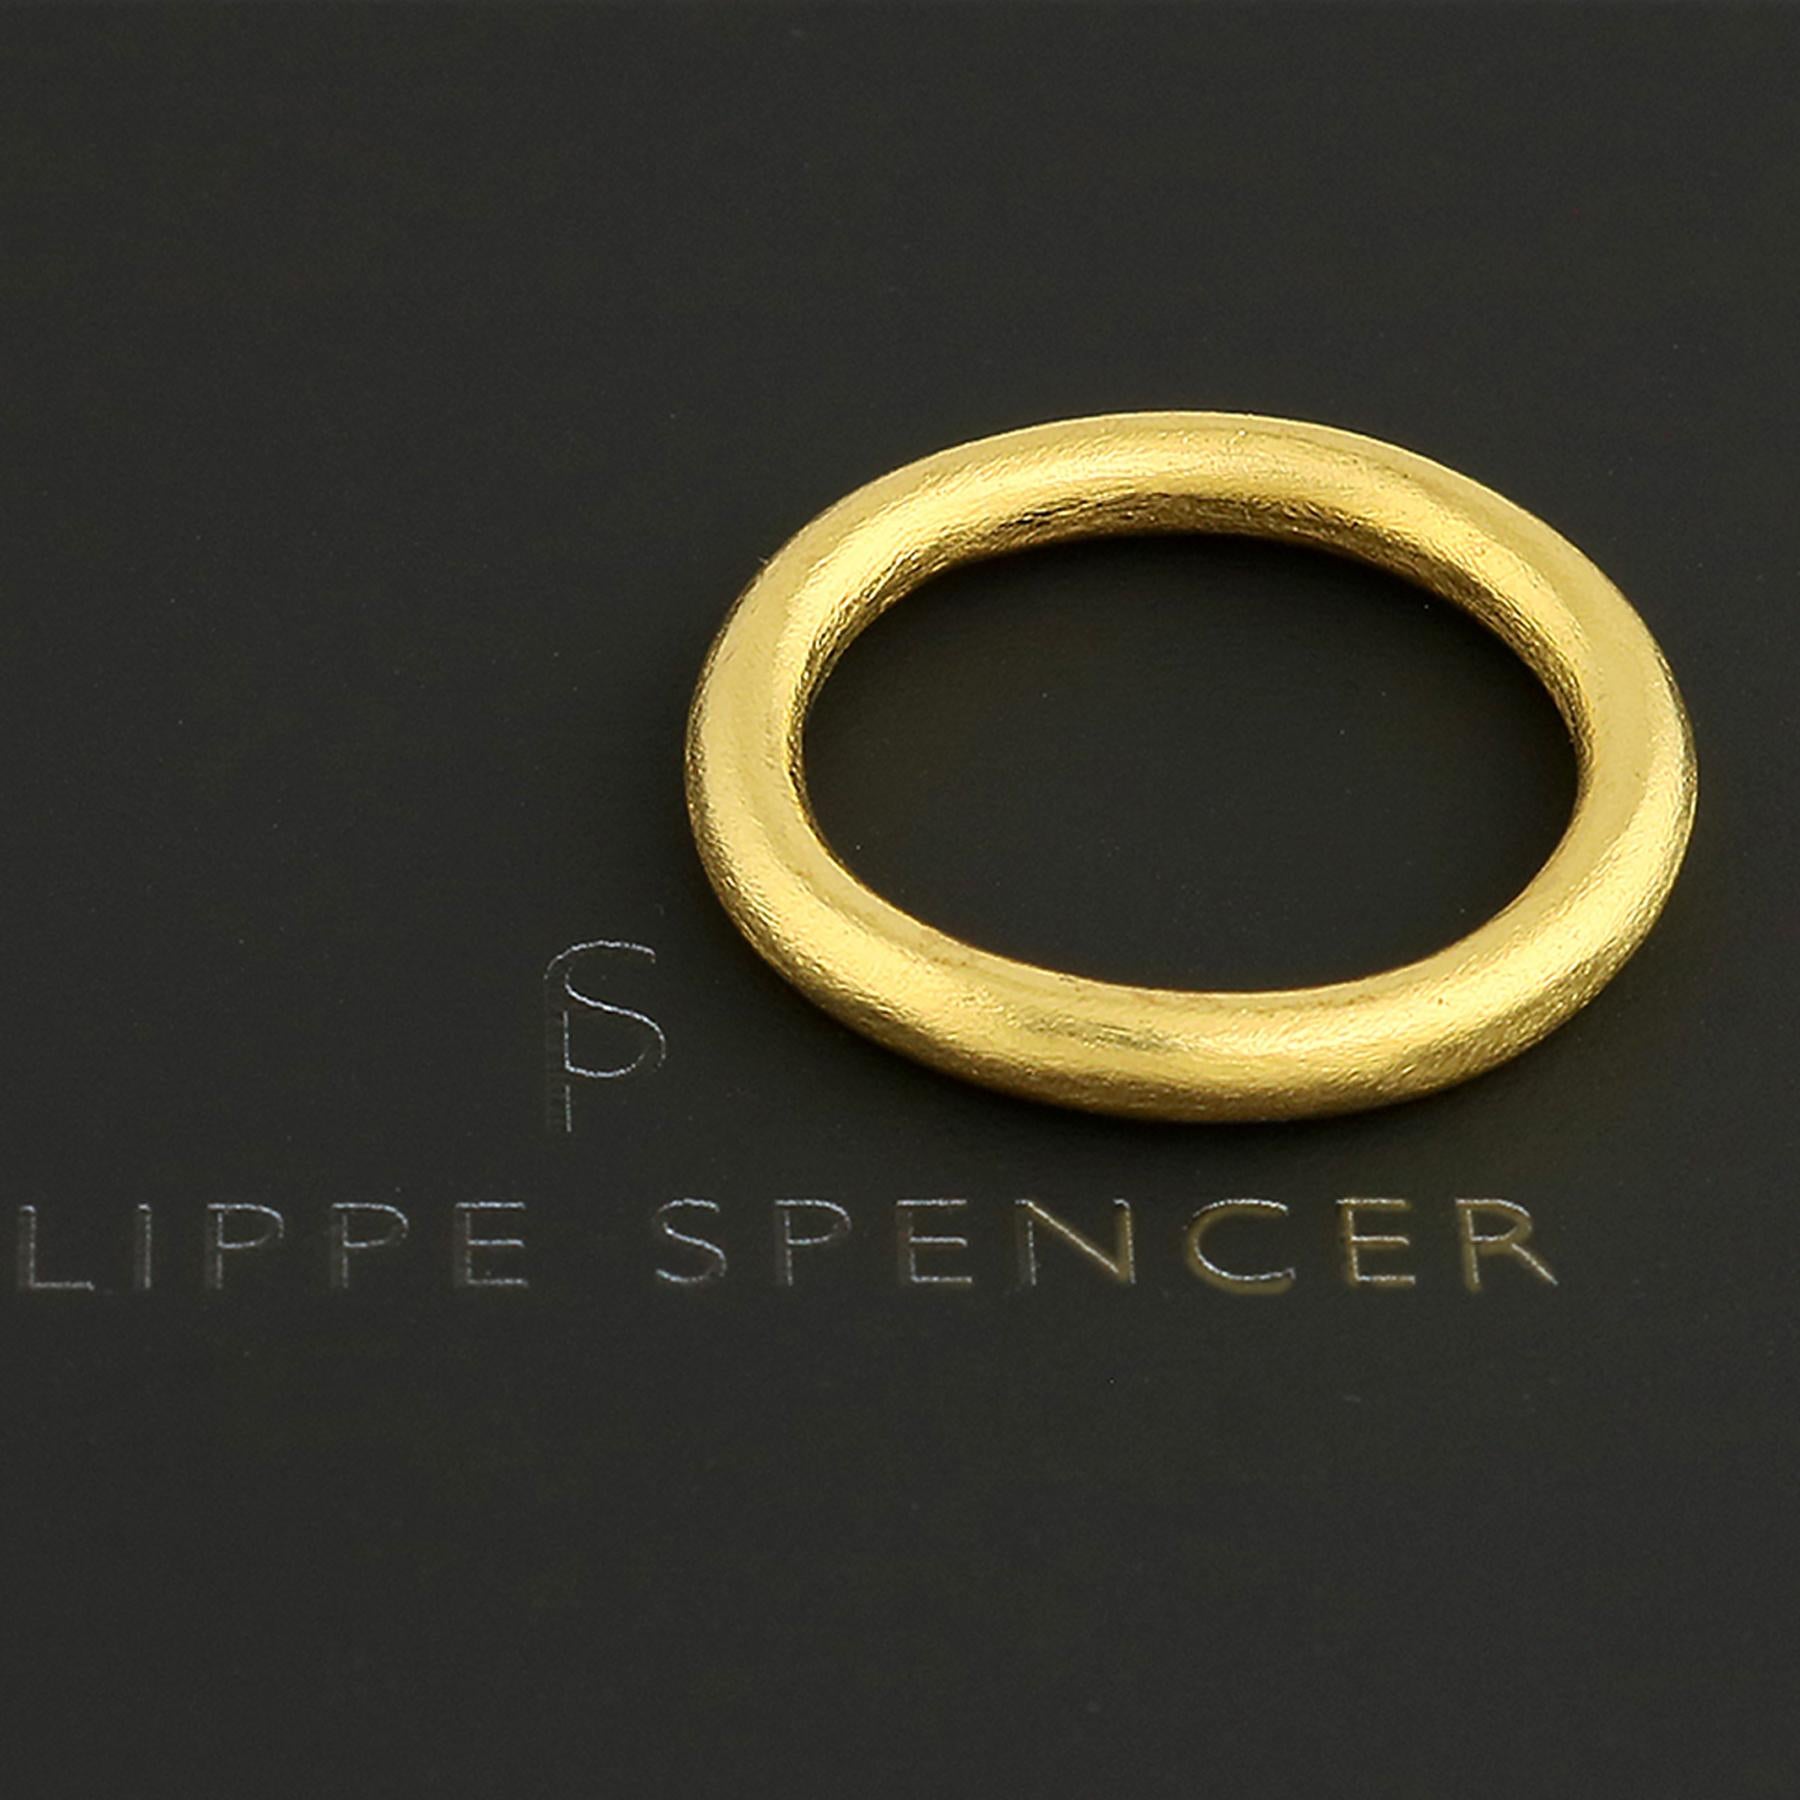 PHILIPPE-SPENCER - 2.8mm Round 20K Gold Hand-Forged Ring. Organic Shape & Matte Finish. Completely Hand-Forged. Each is a unique one-of-a-kind work of art. This PHILIPPE SPENCER solid 20K Gold Hand Made ring is extremely popular with both Men and